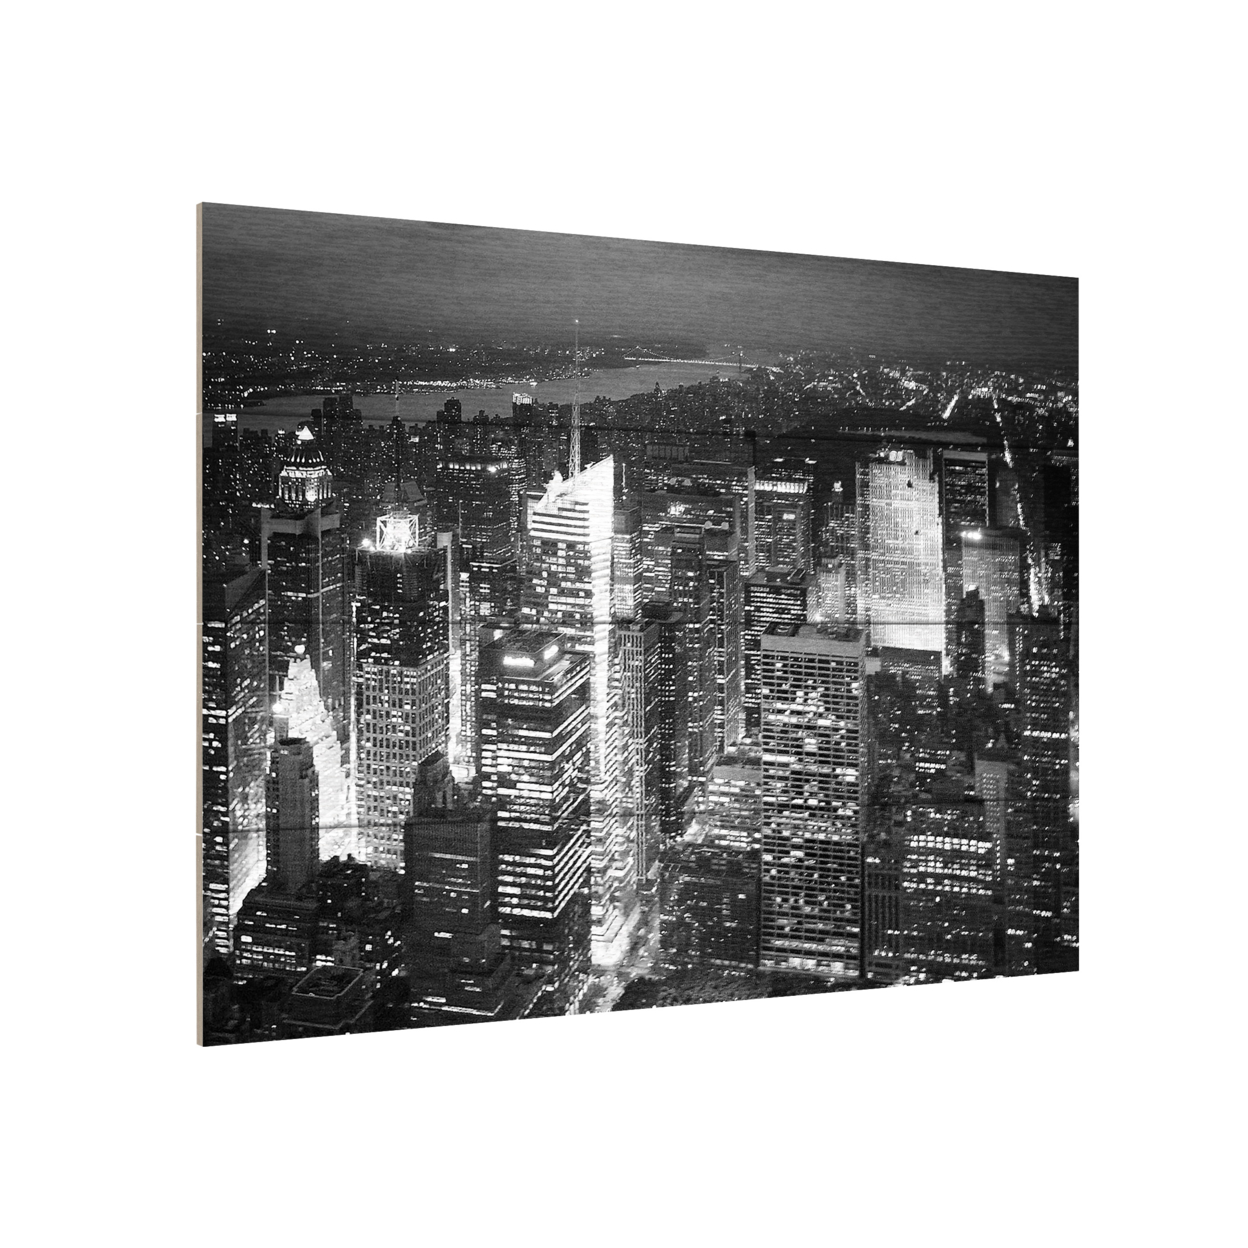 Wall Art 12 X 16 Inches Titled Times Square Ready To Hang Printed On Wooden Planks